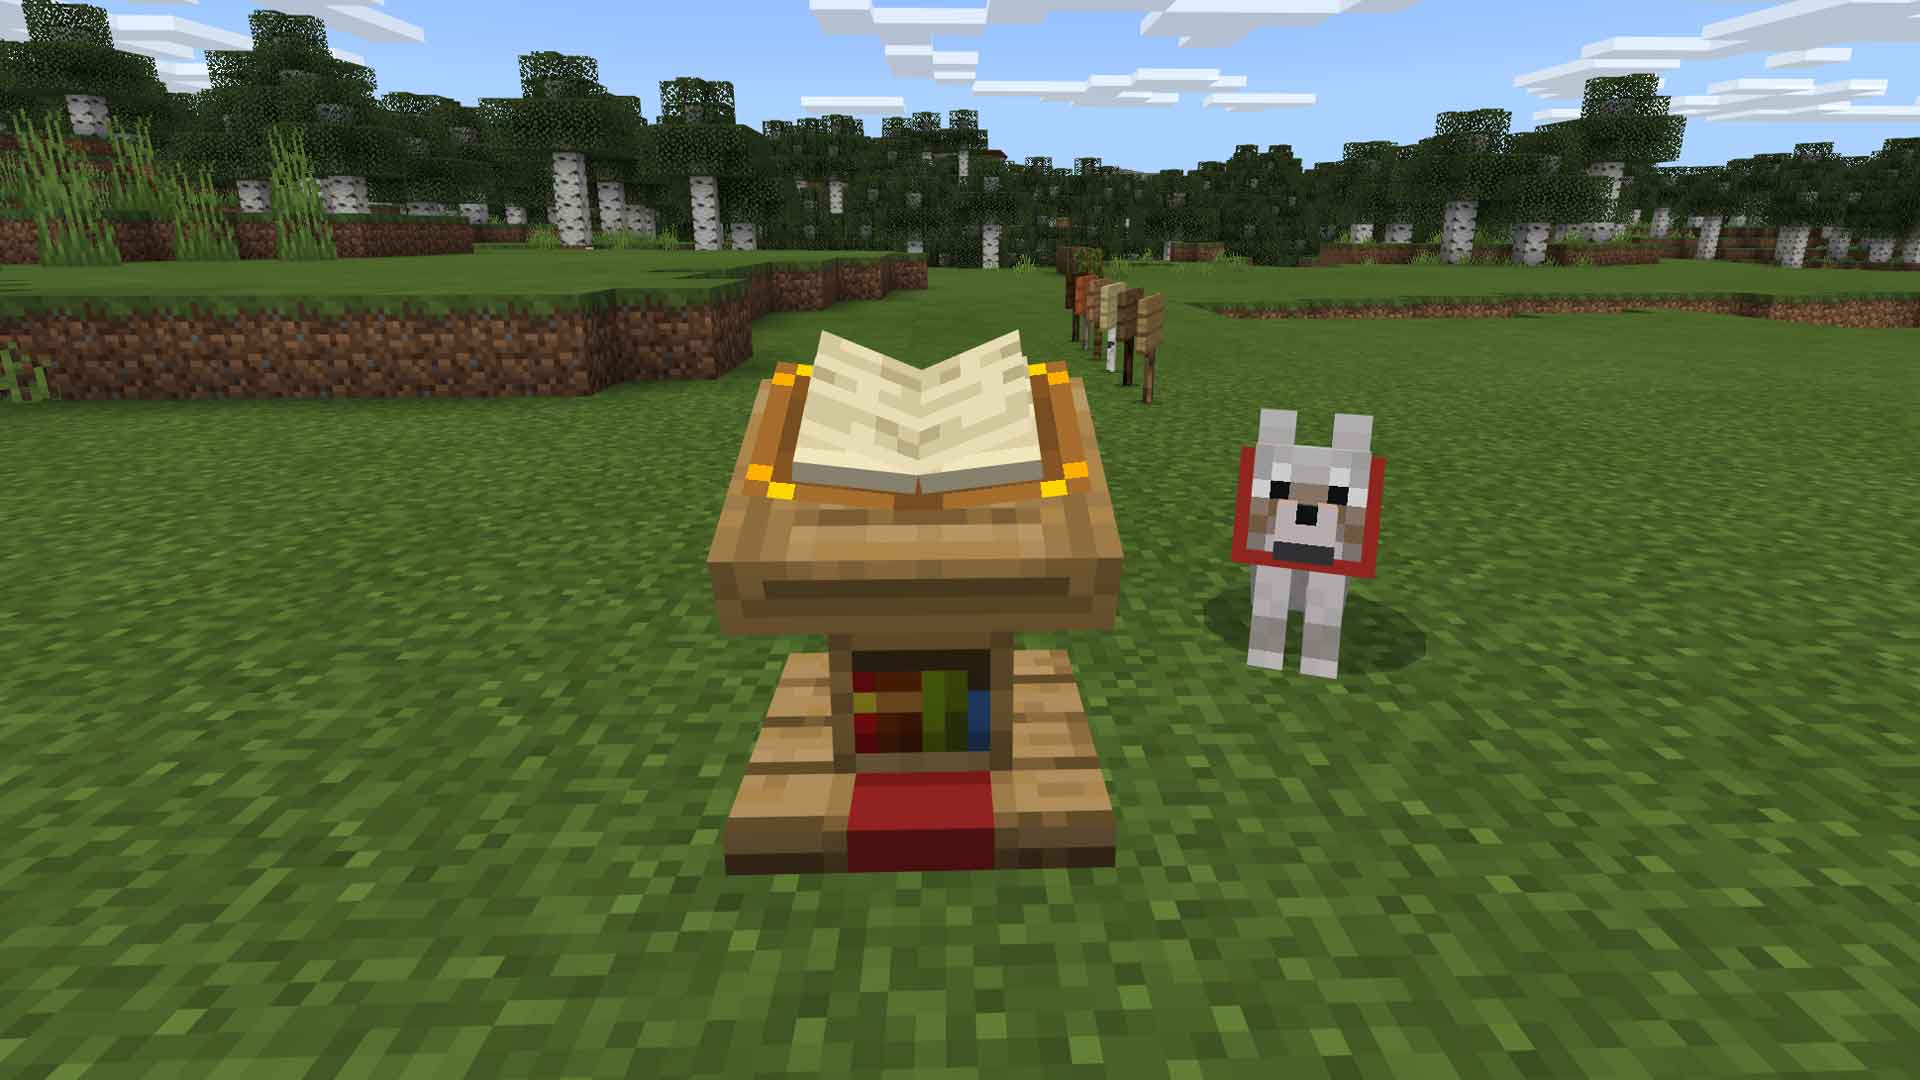 How To Make Lectern In Minecraft